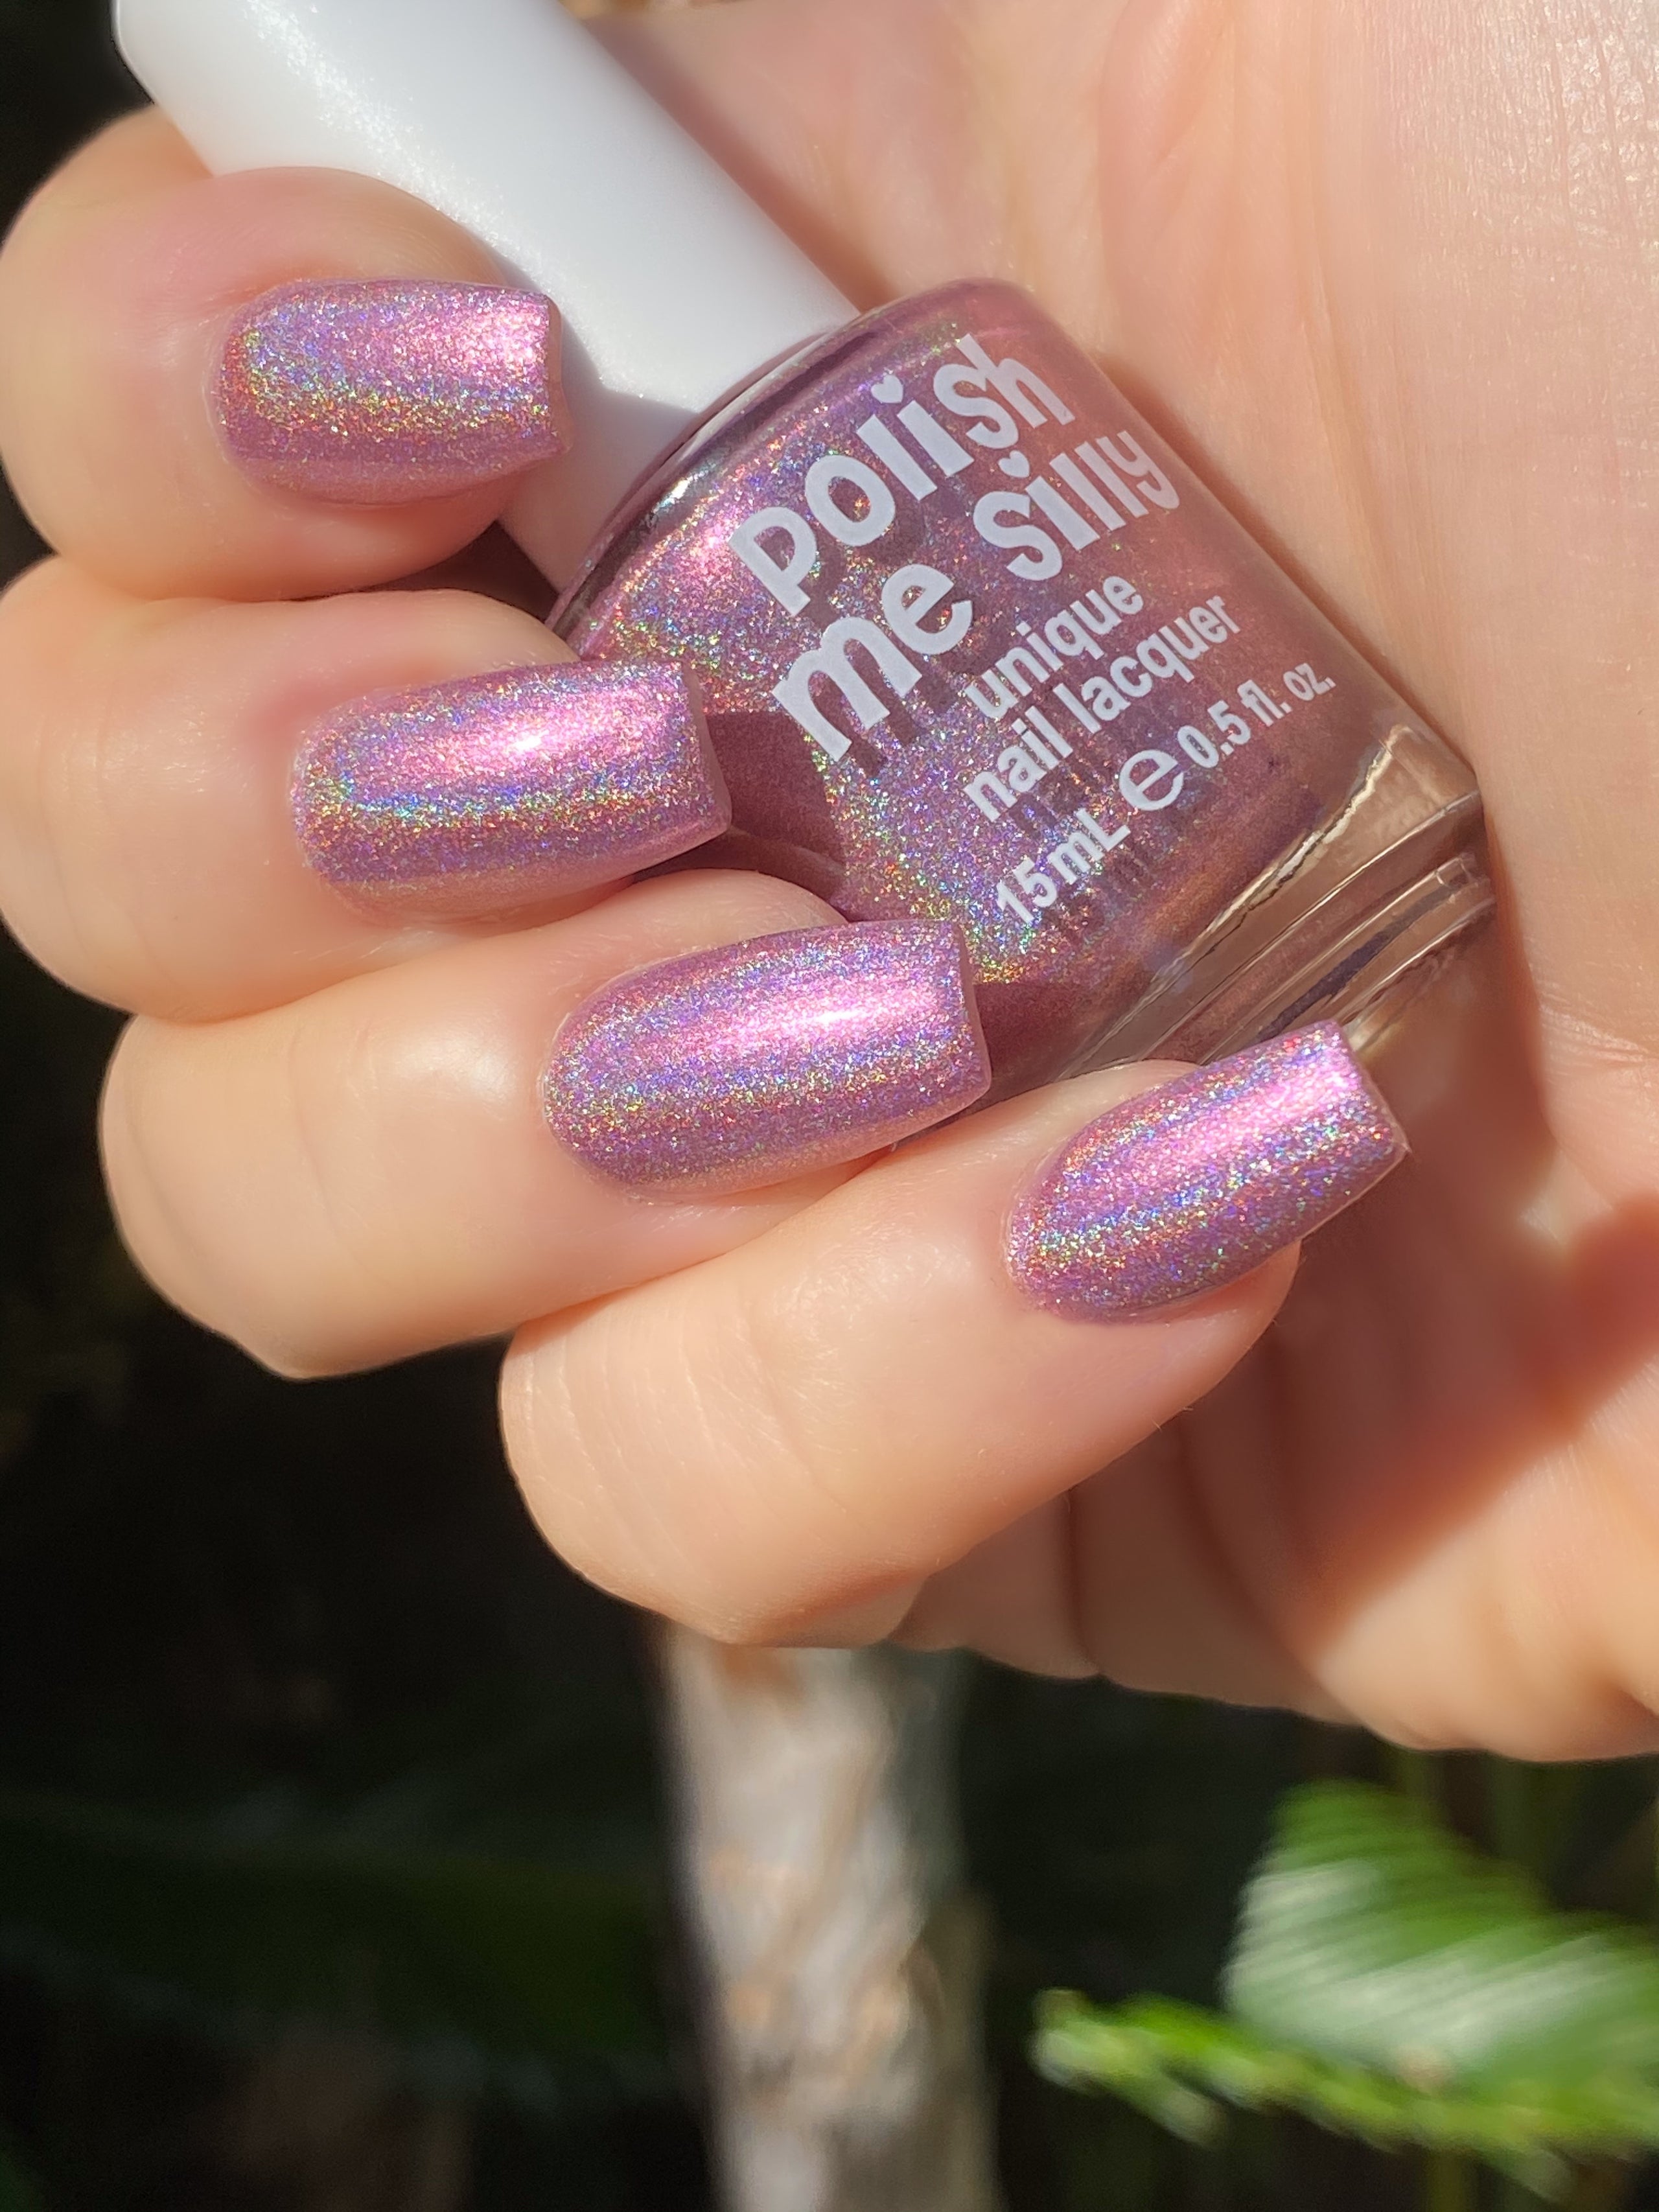 Baby Doll - Holographic: Pink Rainbow Custom-Blended Nail Polish Indie Lacquer / Polish Me Silly